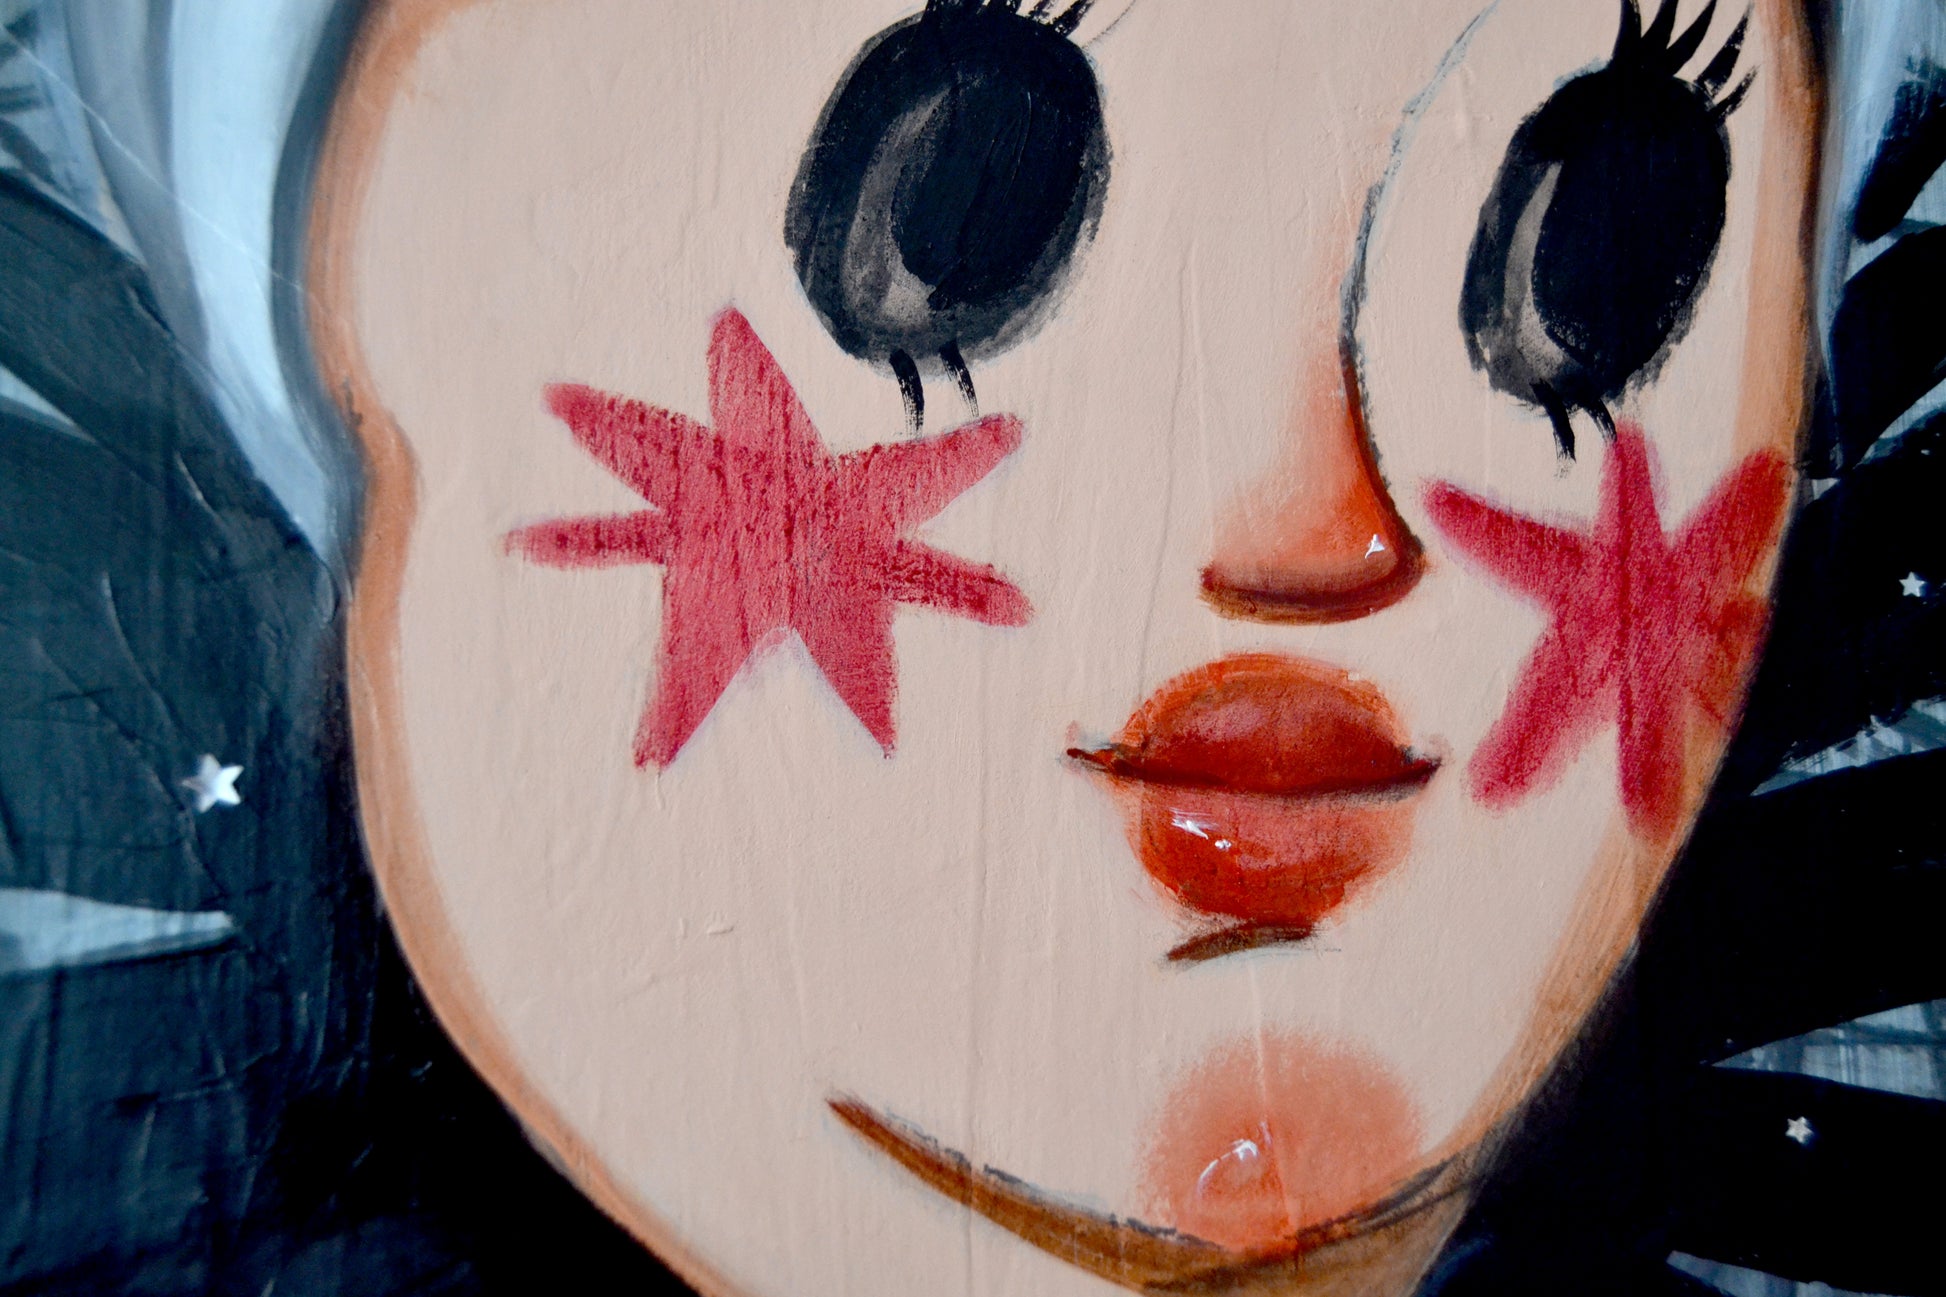 Girl Pierrot with black eyes. Original painting available in the art shop by Yana Medow artist.